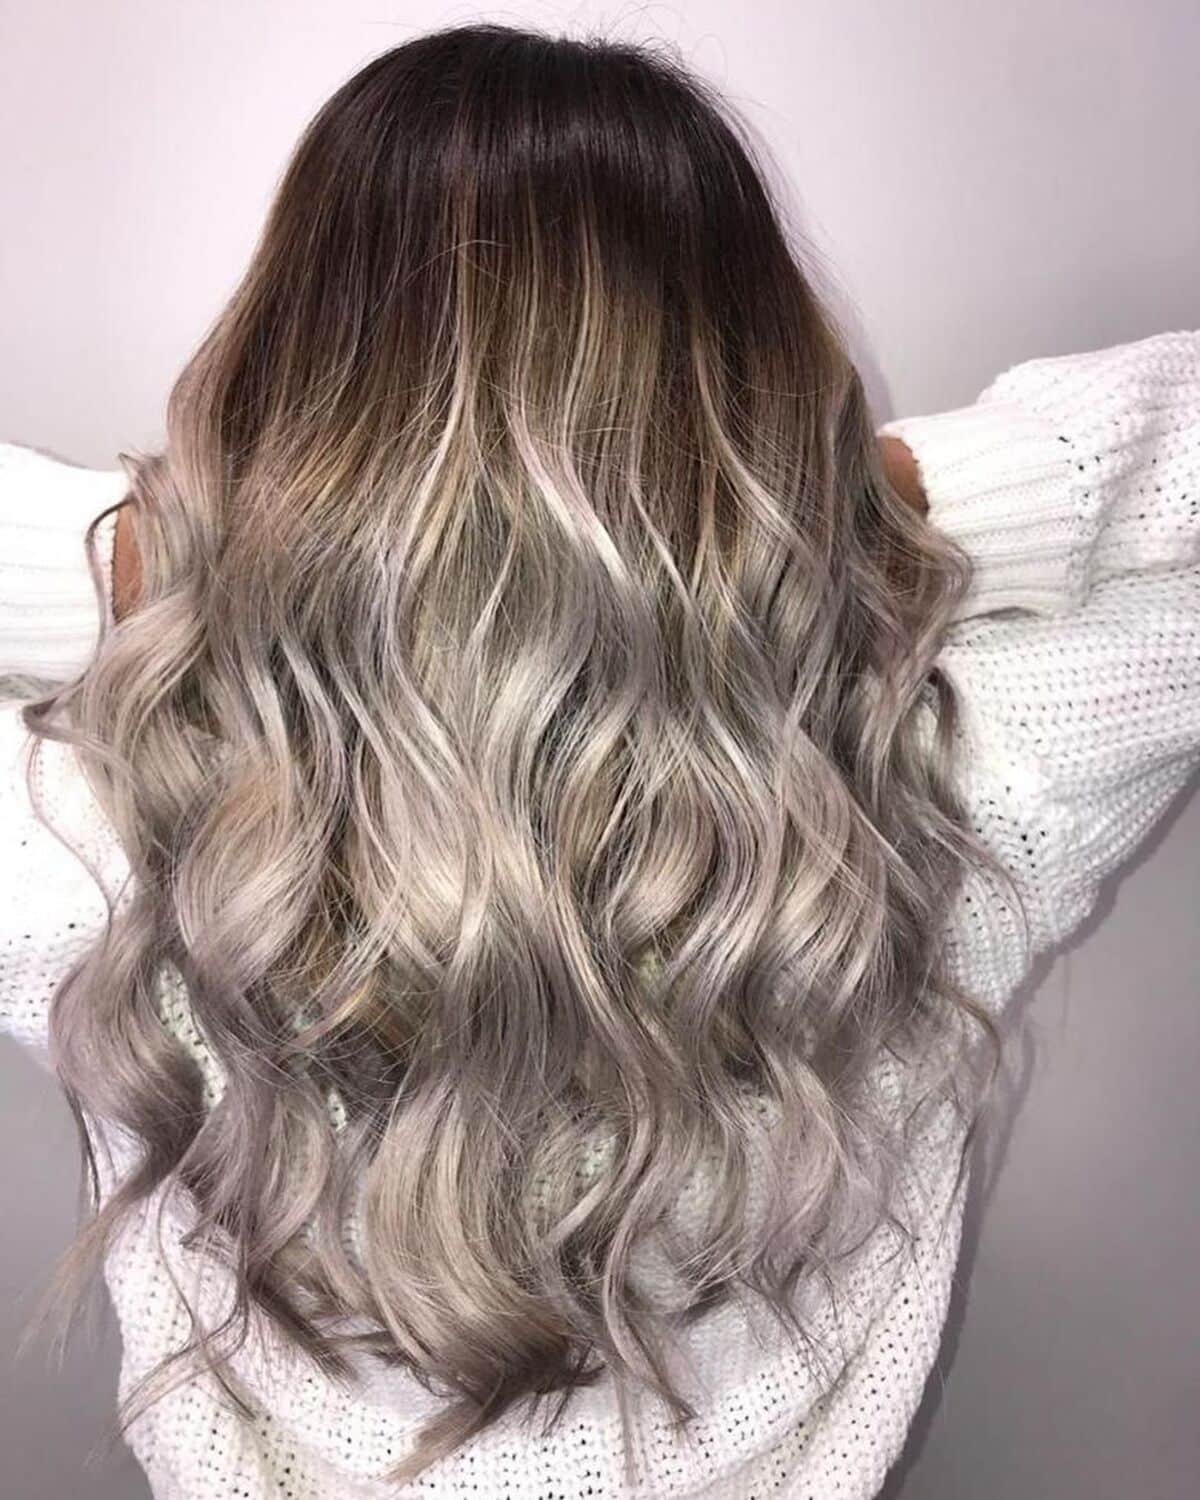 Mahogany Brown to Platinum Blonde Ombre Hairstyle